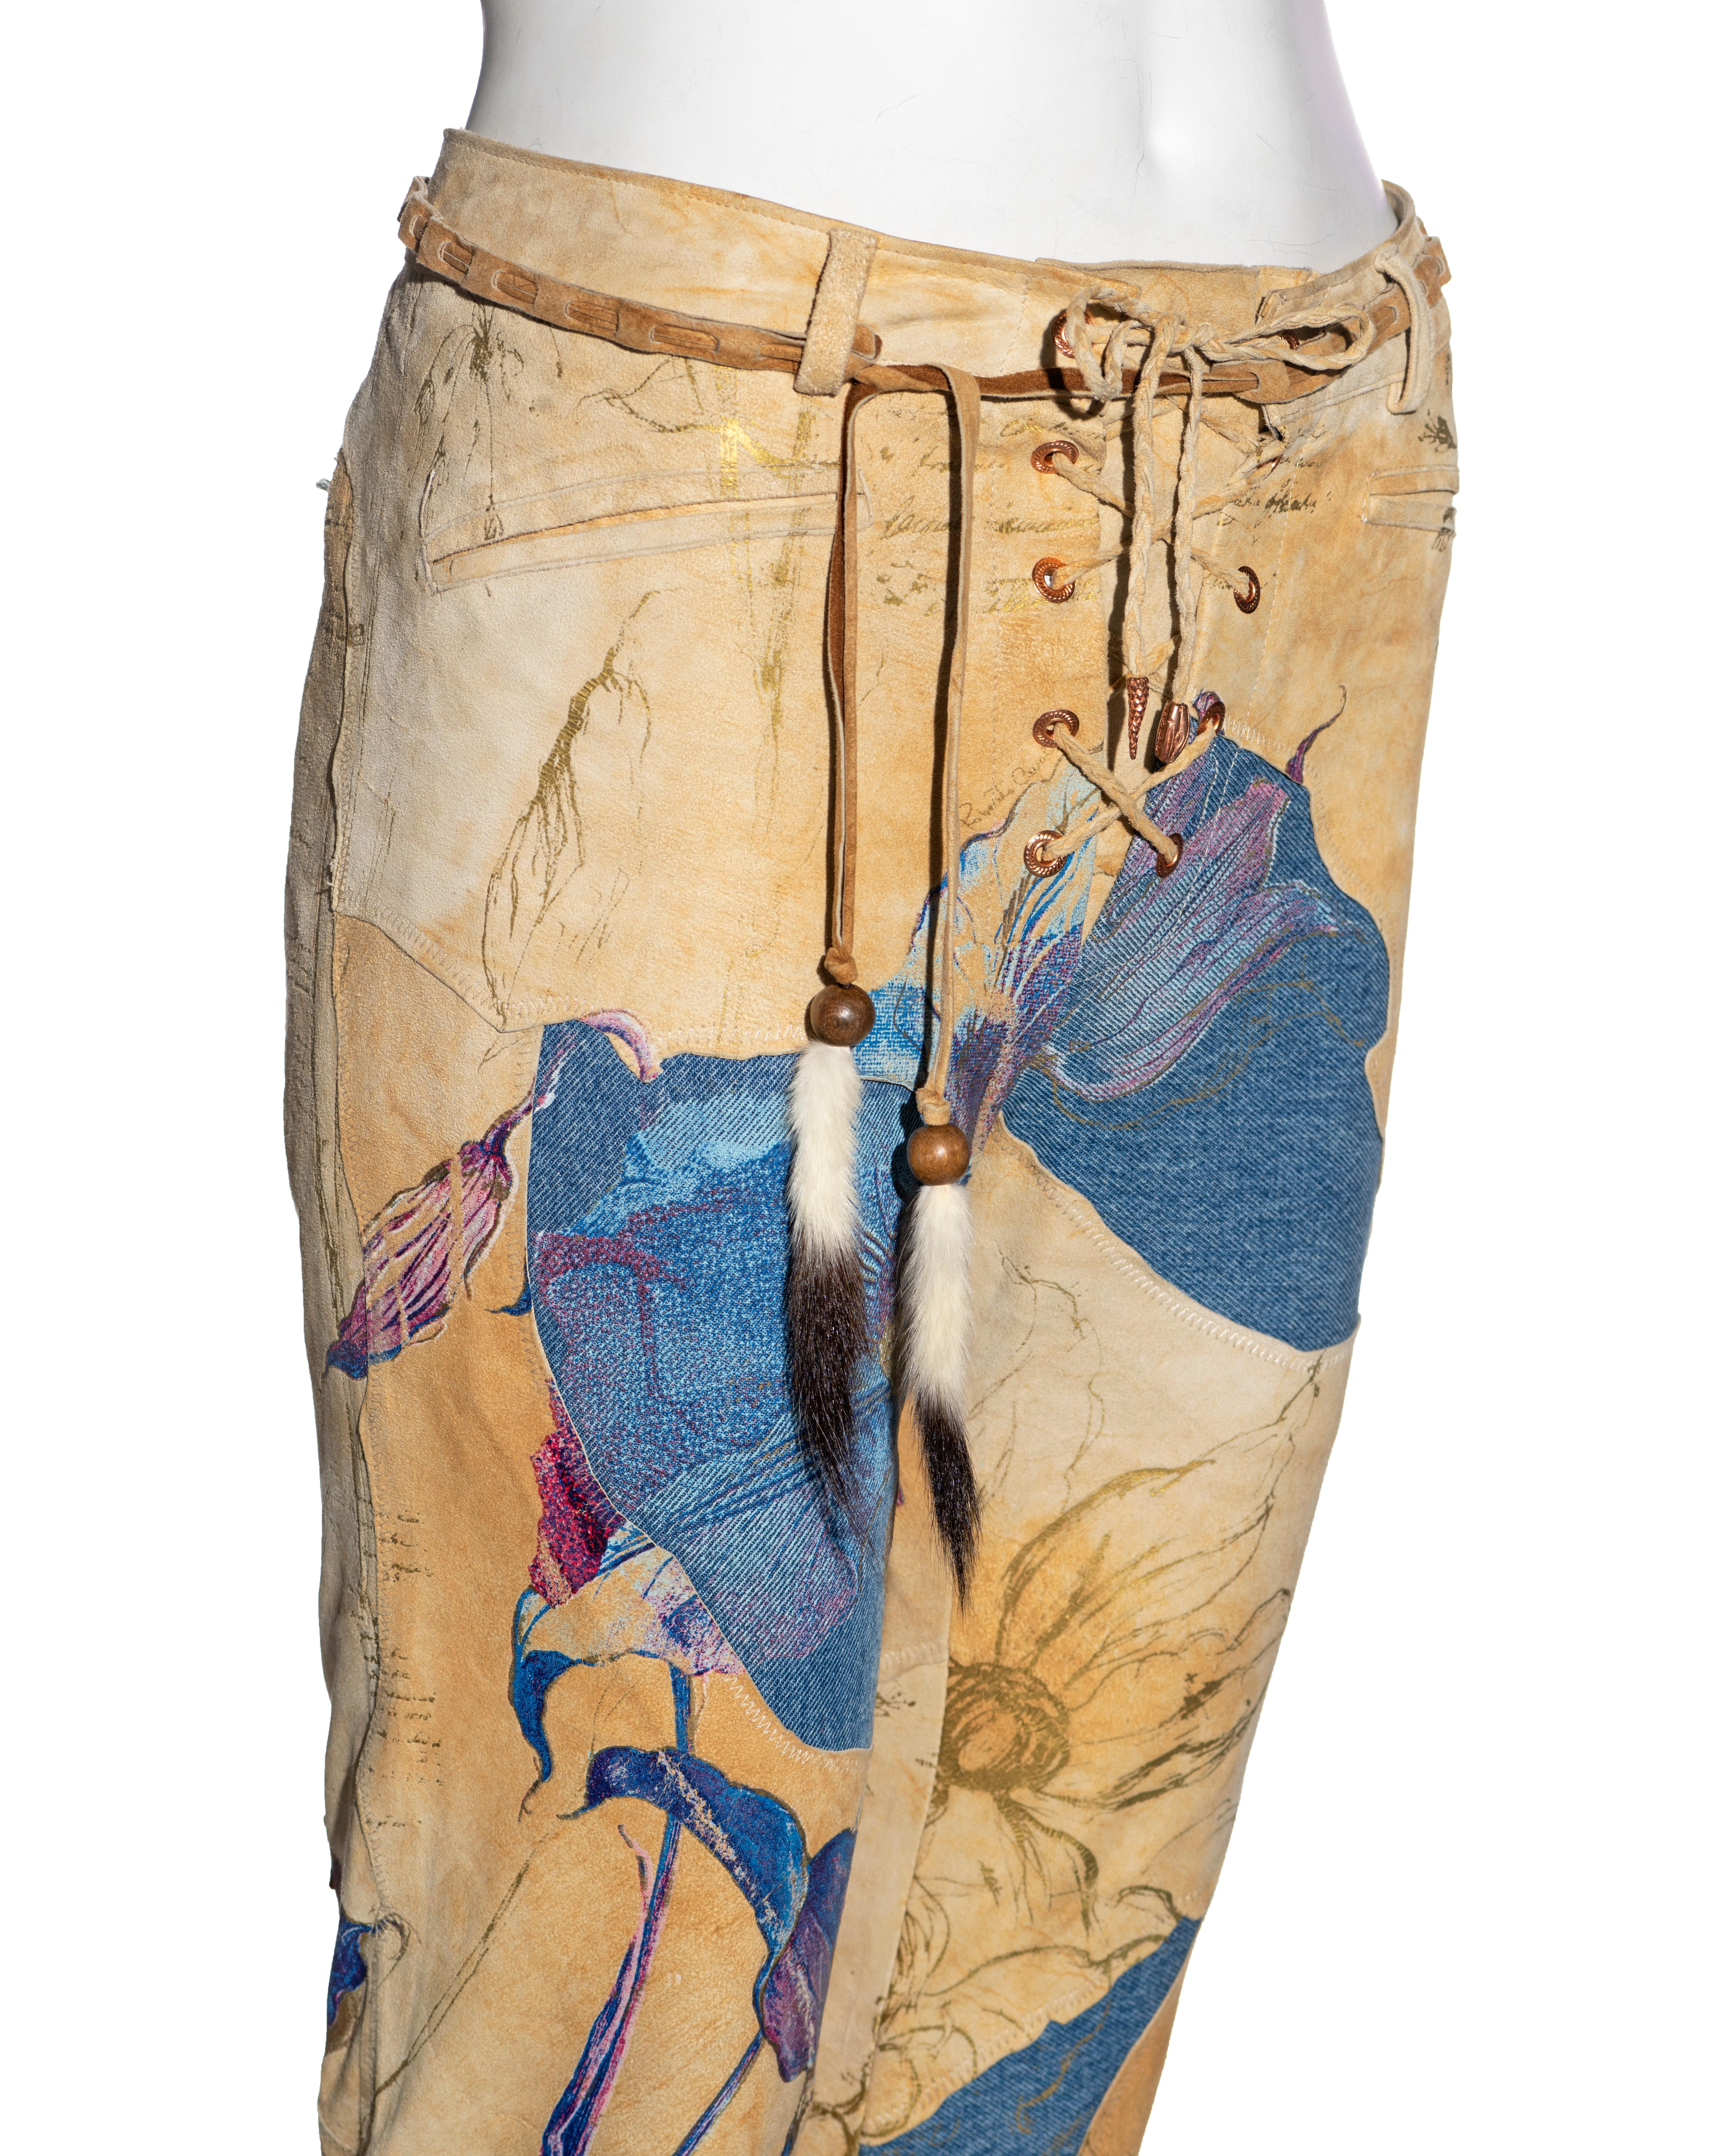 Roberto Cavalli leather and denim patchwork pants with gold foil print, fw 1999 2